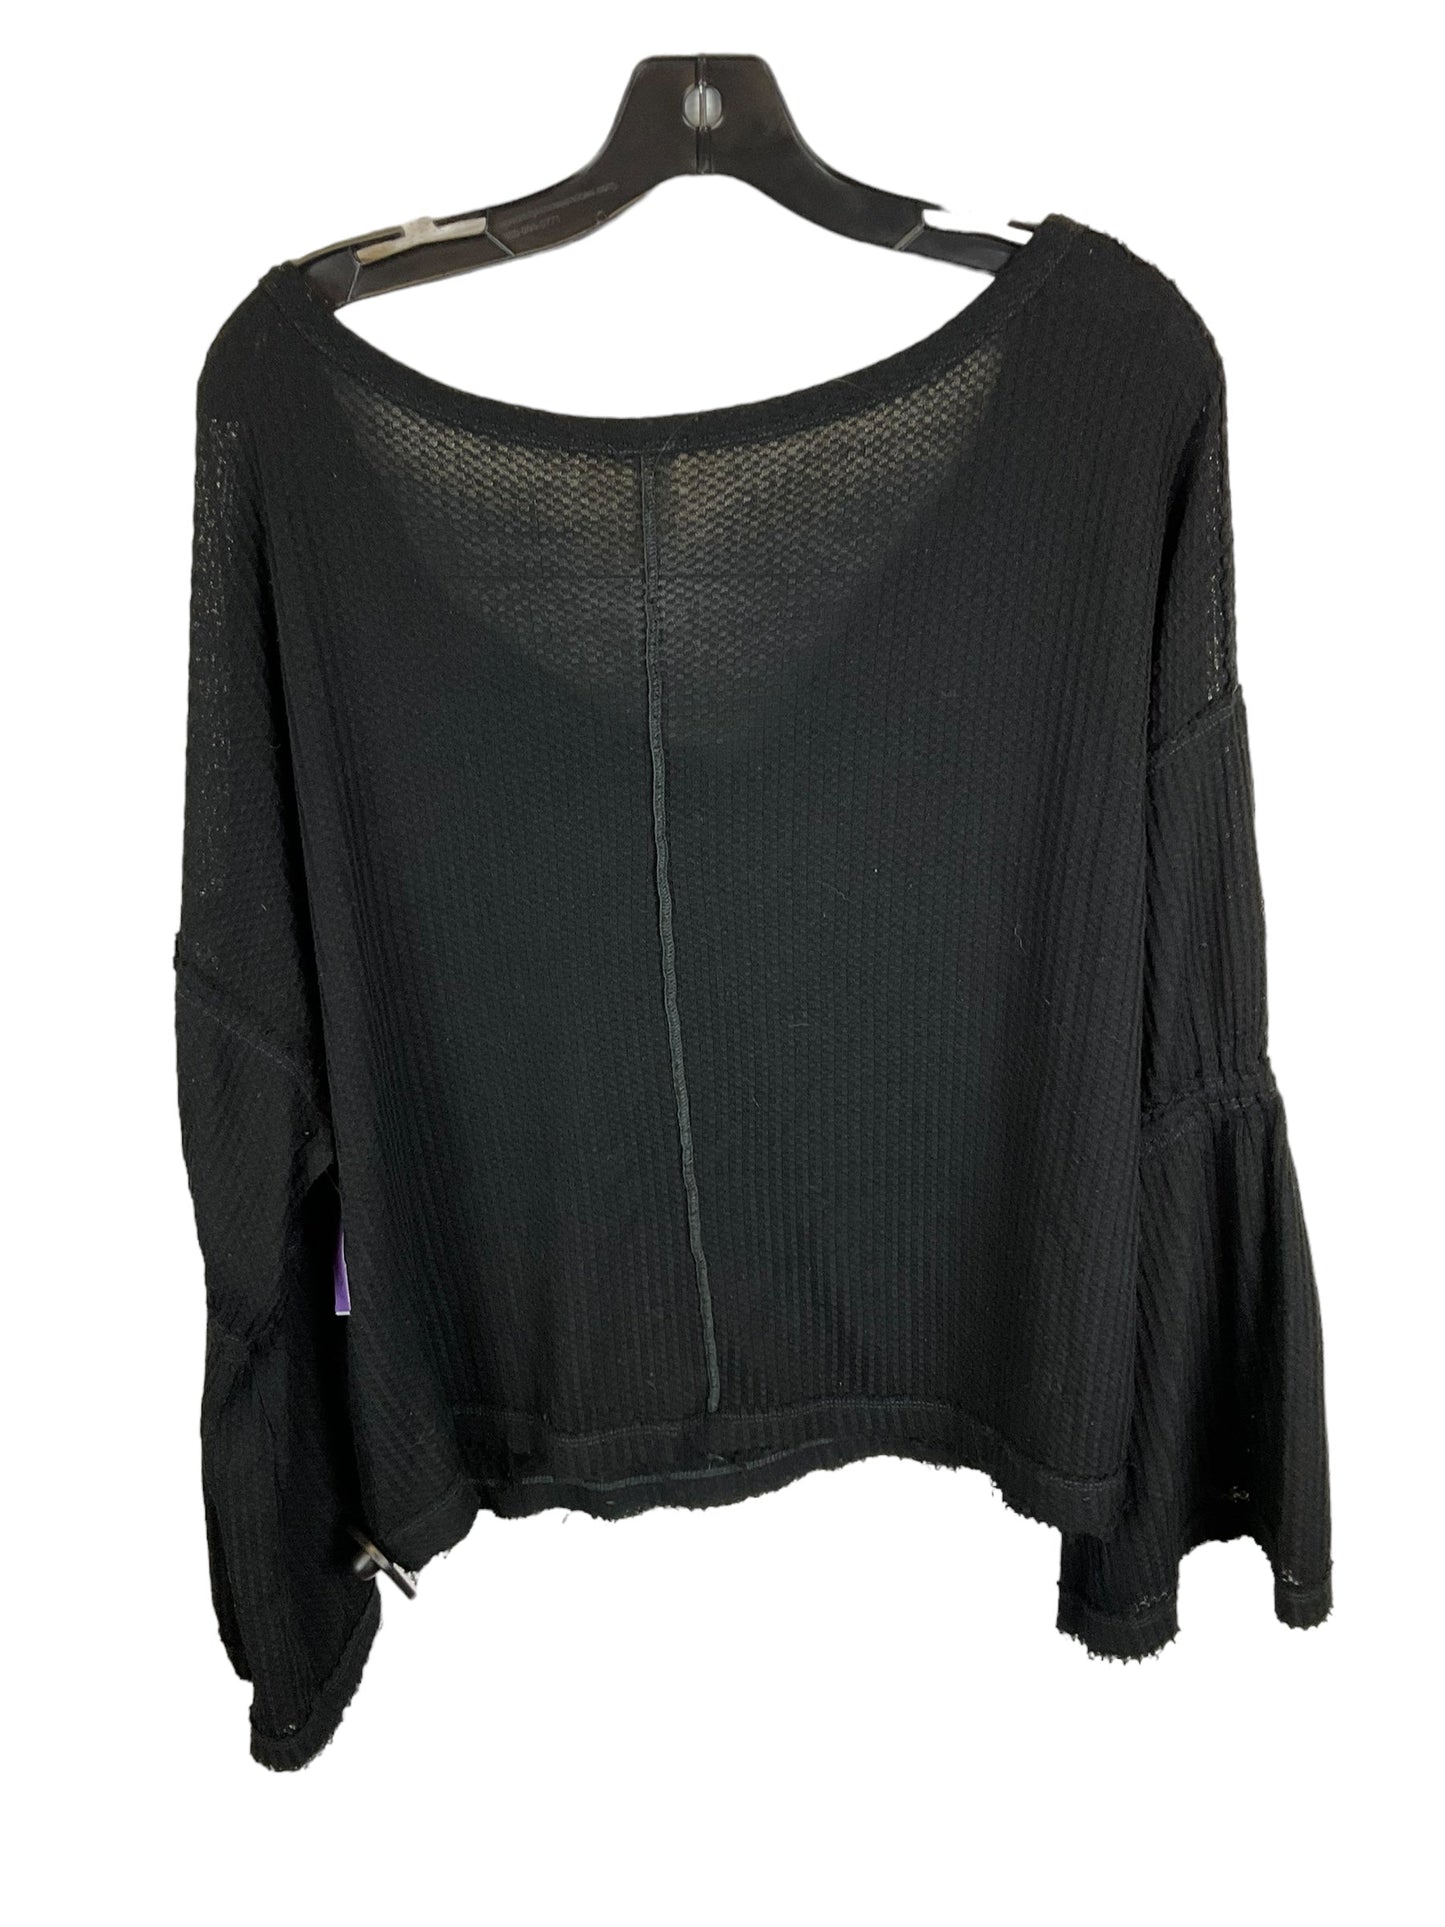 Black Top Long Sleeve We The Free, Size S